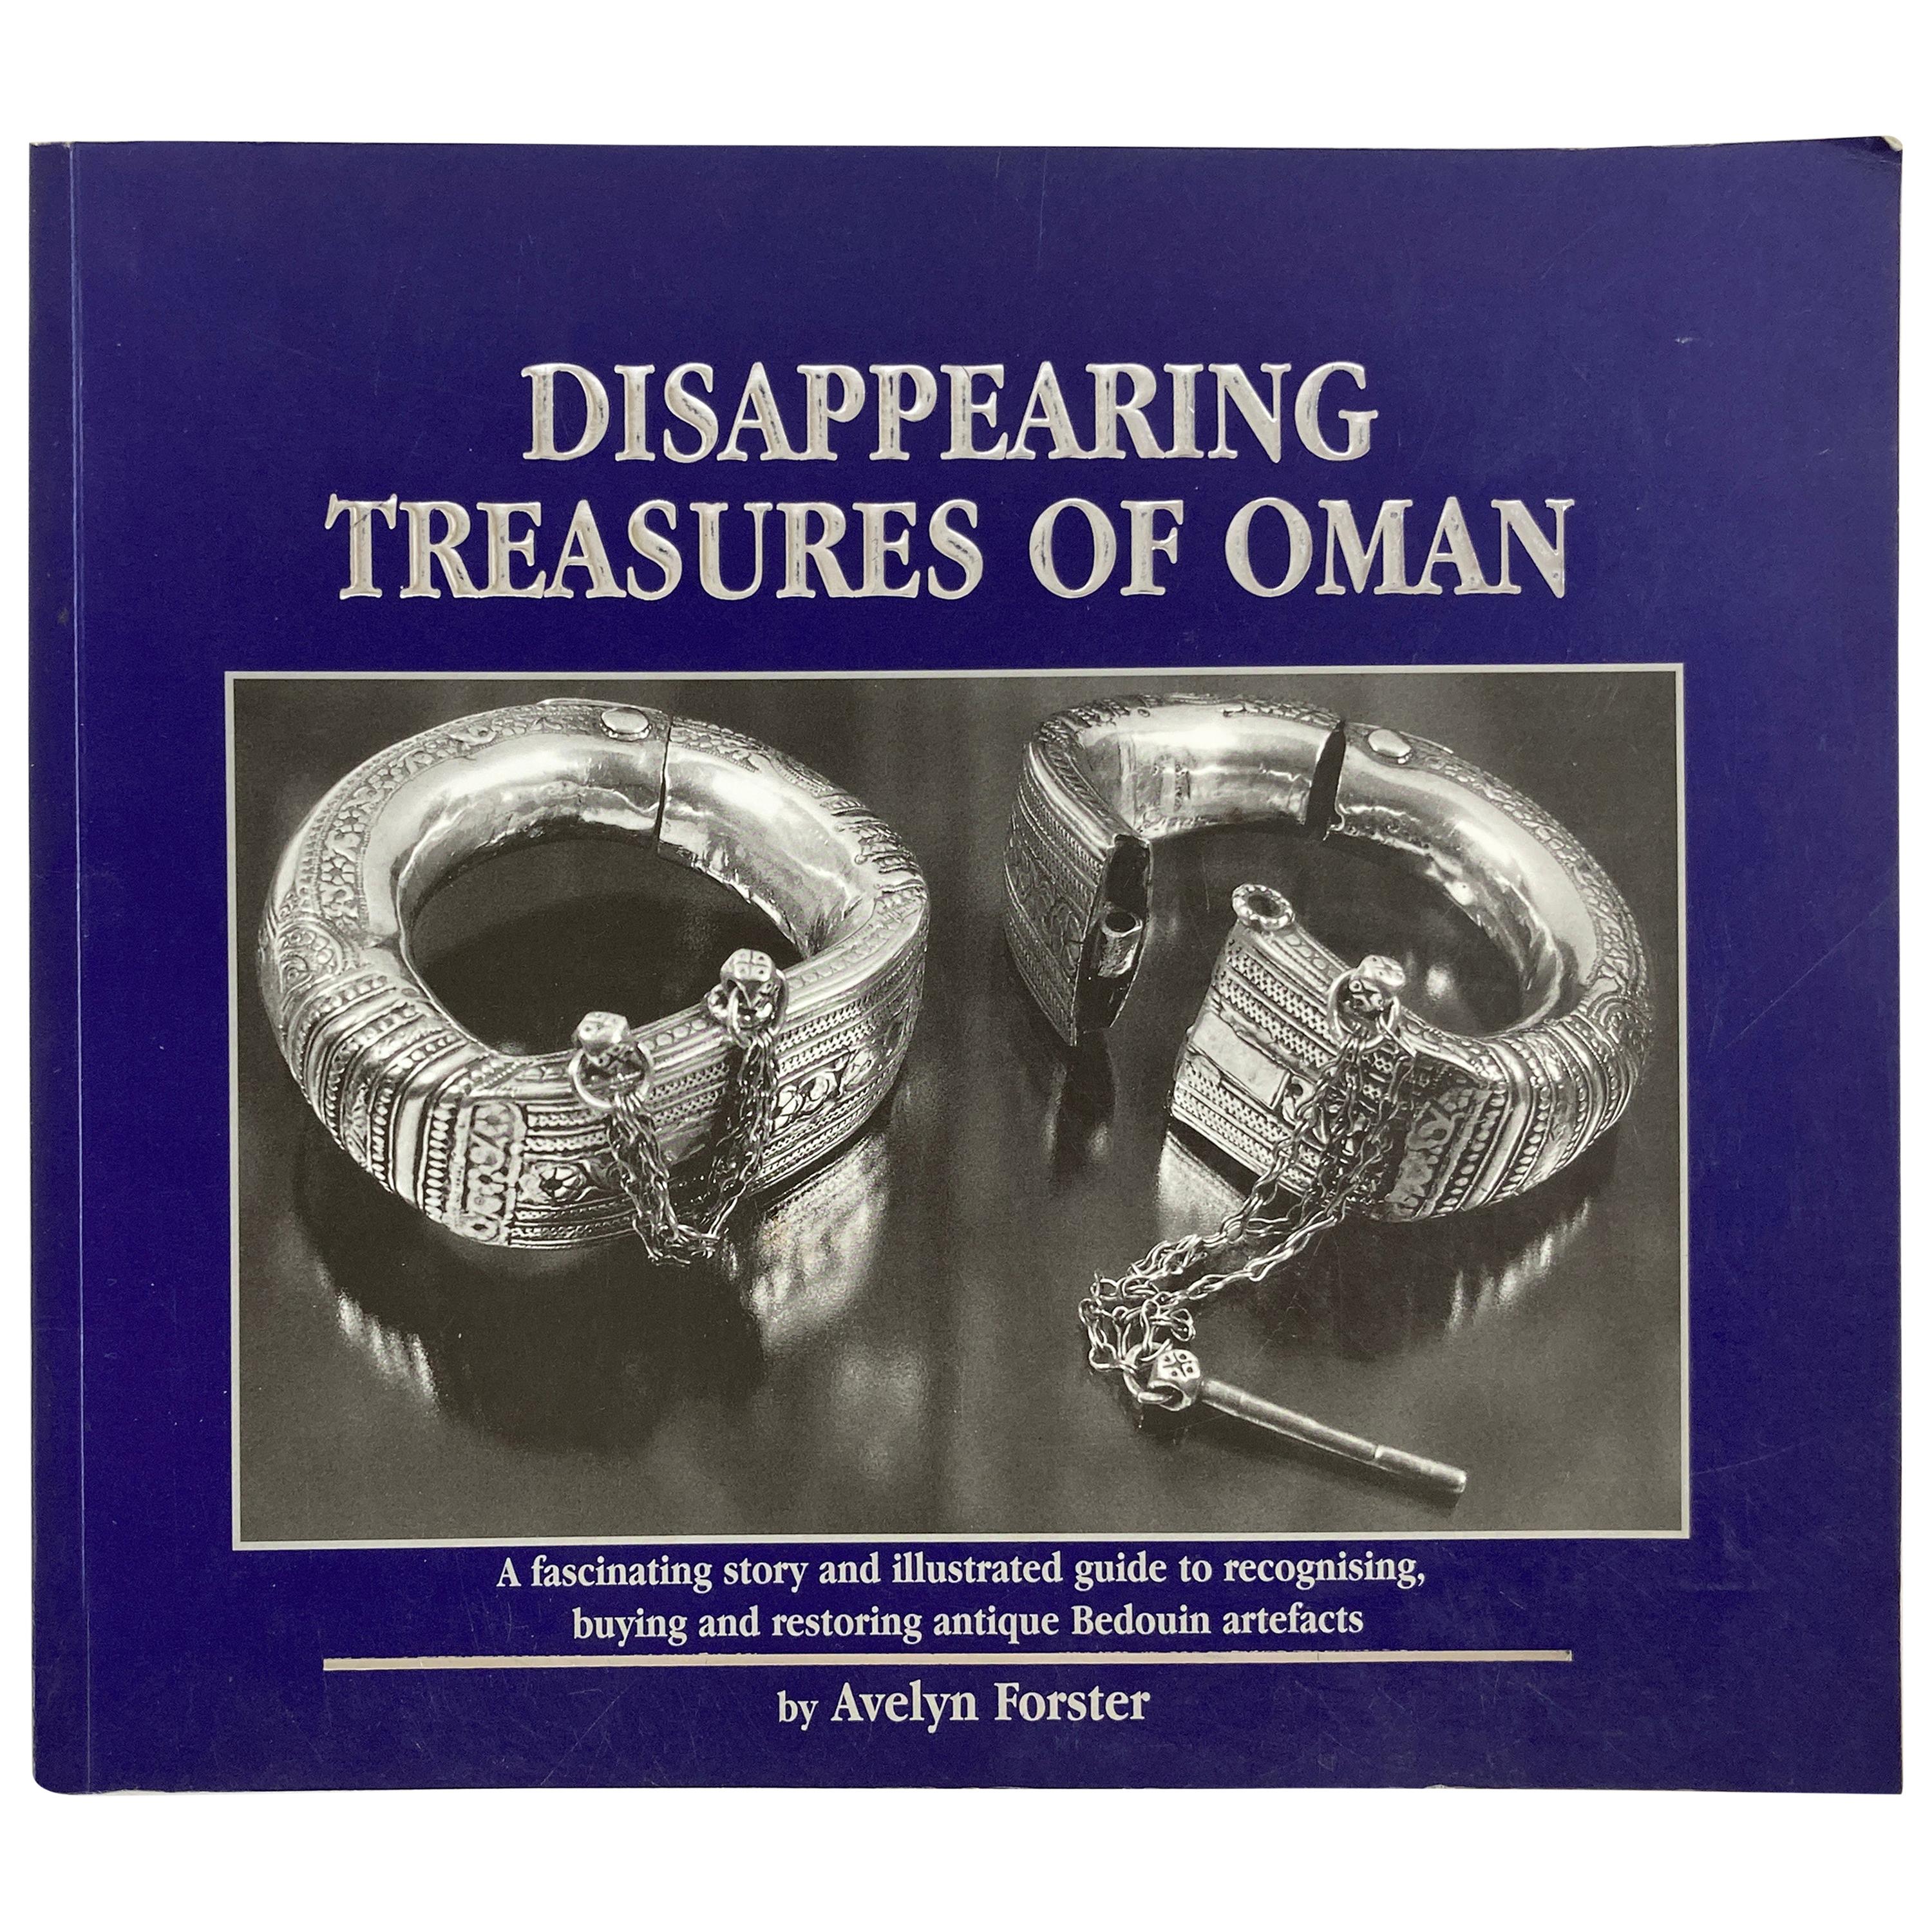 Disappearing Treasures of Oman Book by Avelyn Forster For Sale